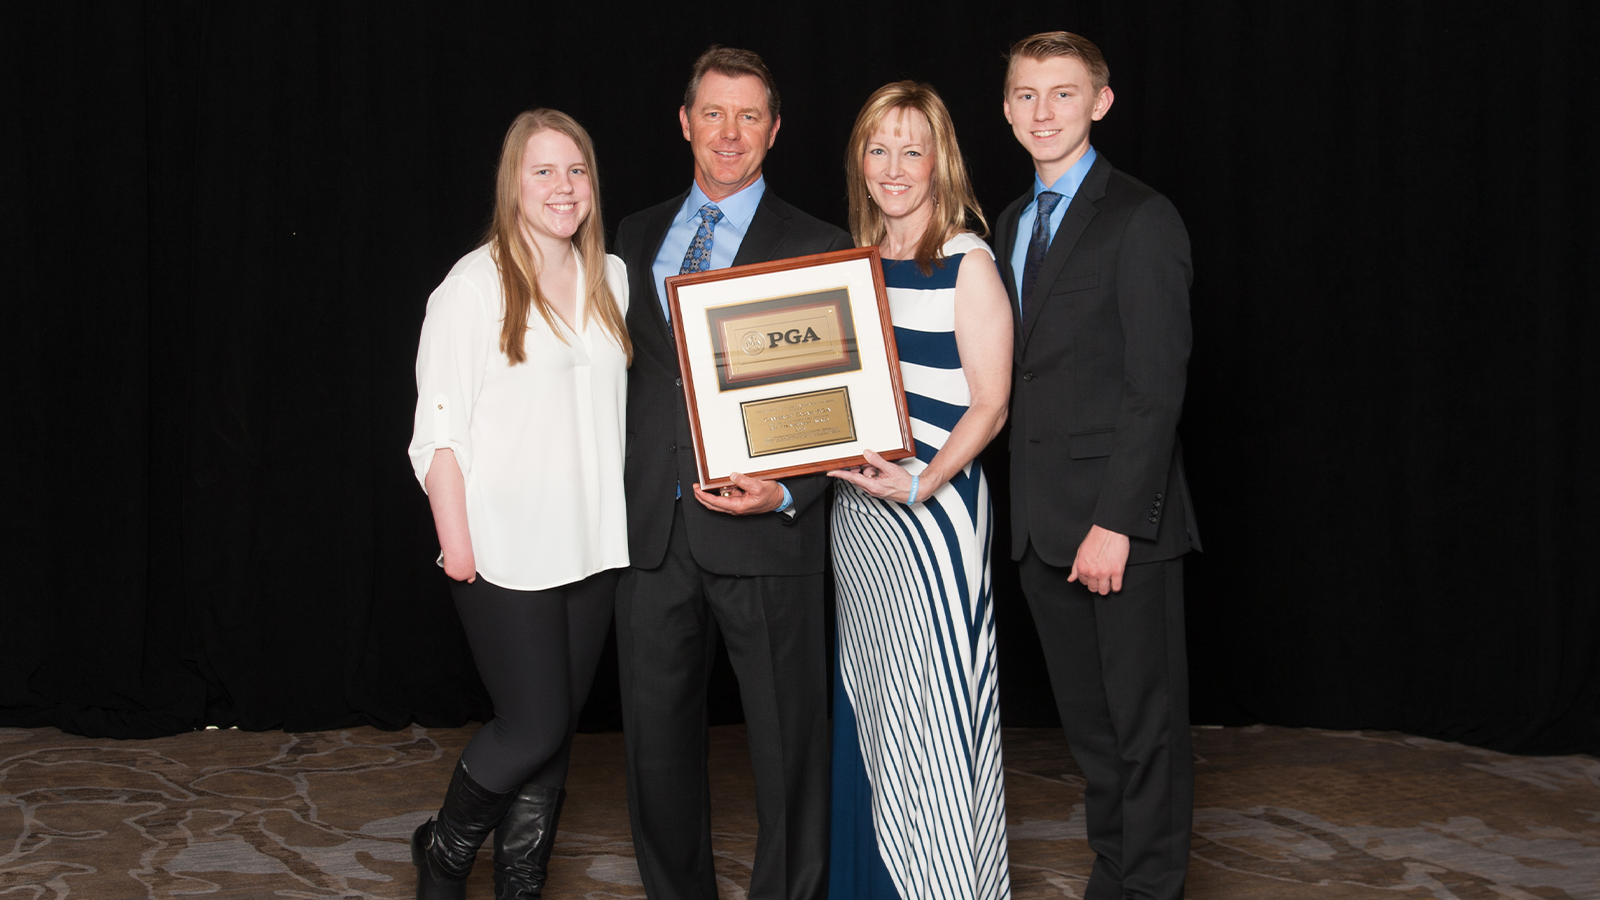 Cameron Doan, Bill Strausbaugh Award winner, & his family during the 102nd Annual Meeting at the Renaissance Indian Wells Resort & Spa on November 6, 2018 in Indian Wells, California. (Photo by Darren Carroll/PGA of America)